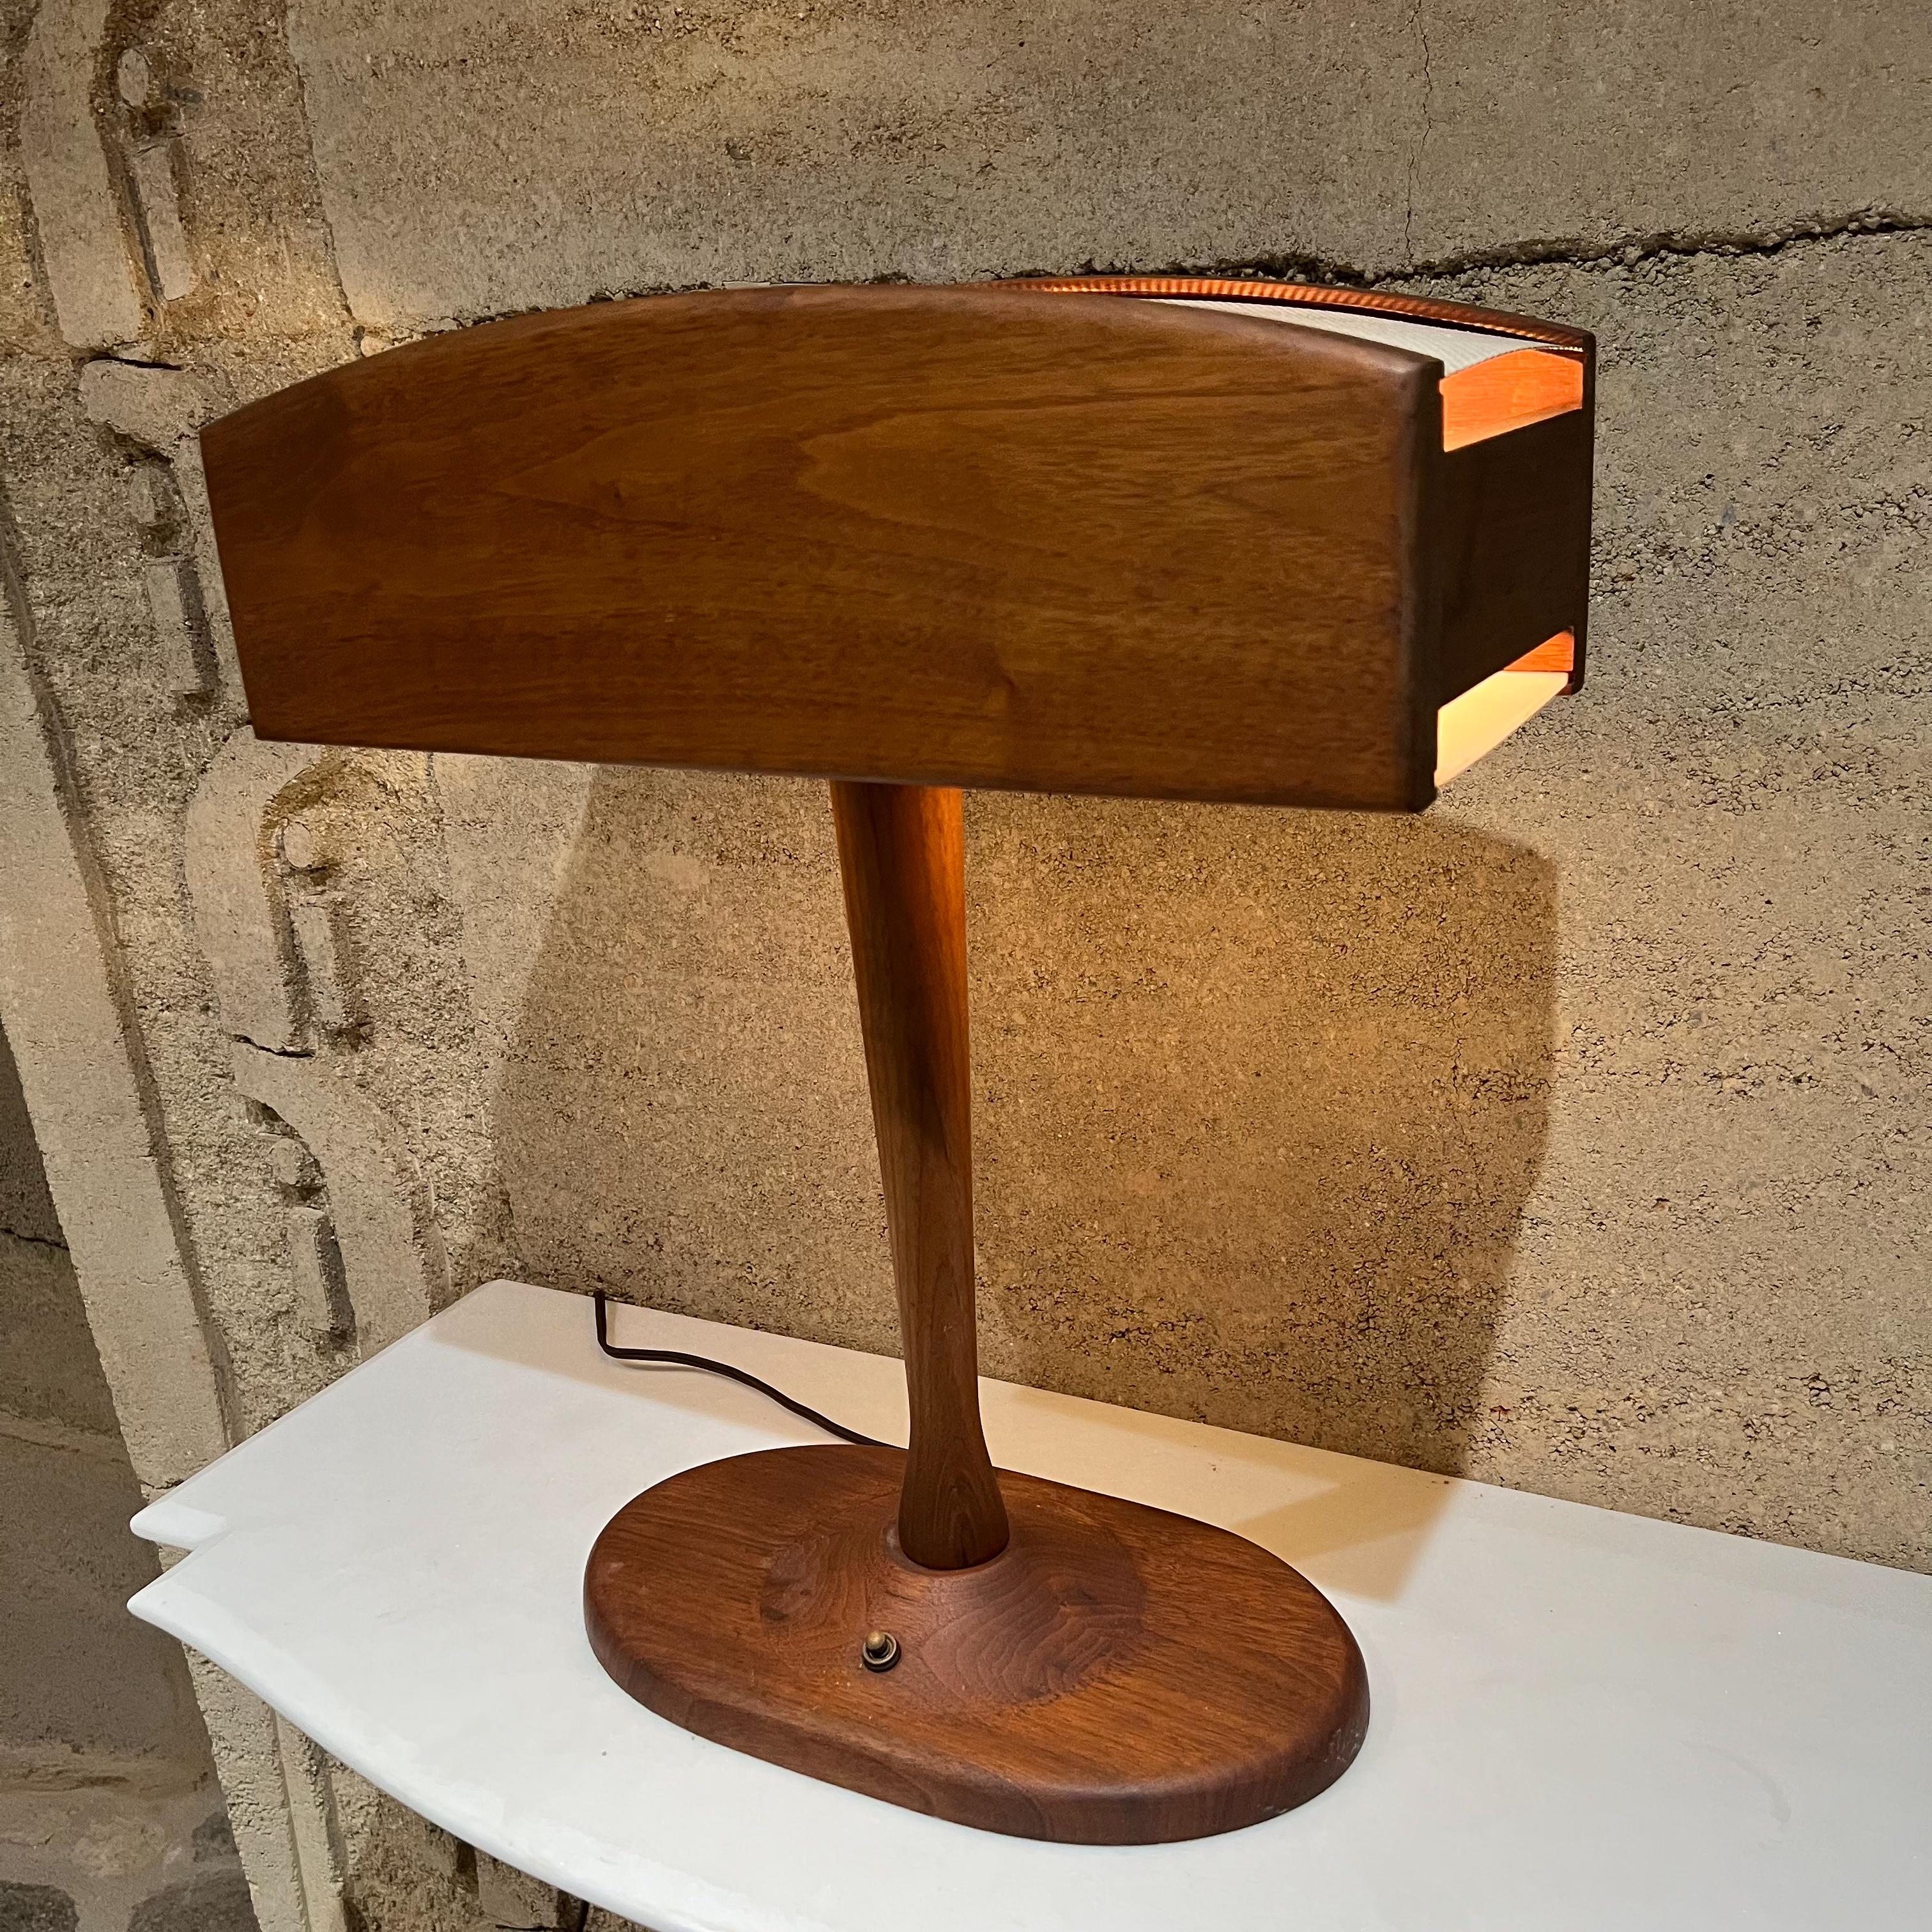 Desk Lamp Midcentury Modern
1960s Midcentury Modern Walnut Wood Desk Lamp Organic Beauty
Warm walnut wood. Modern clean lines. Lovely flair of light.
19 tall x 16 w x 7 d
Preowned original unrestored vintage condition.
See images provided please.
